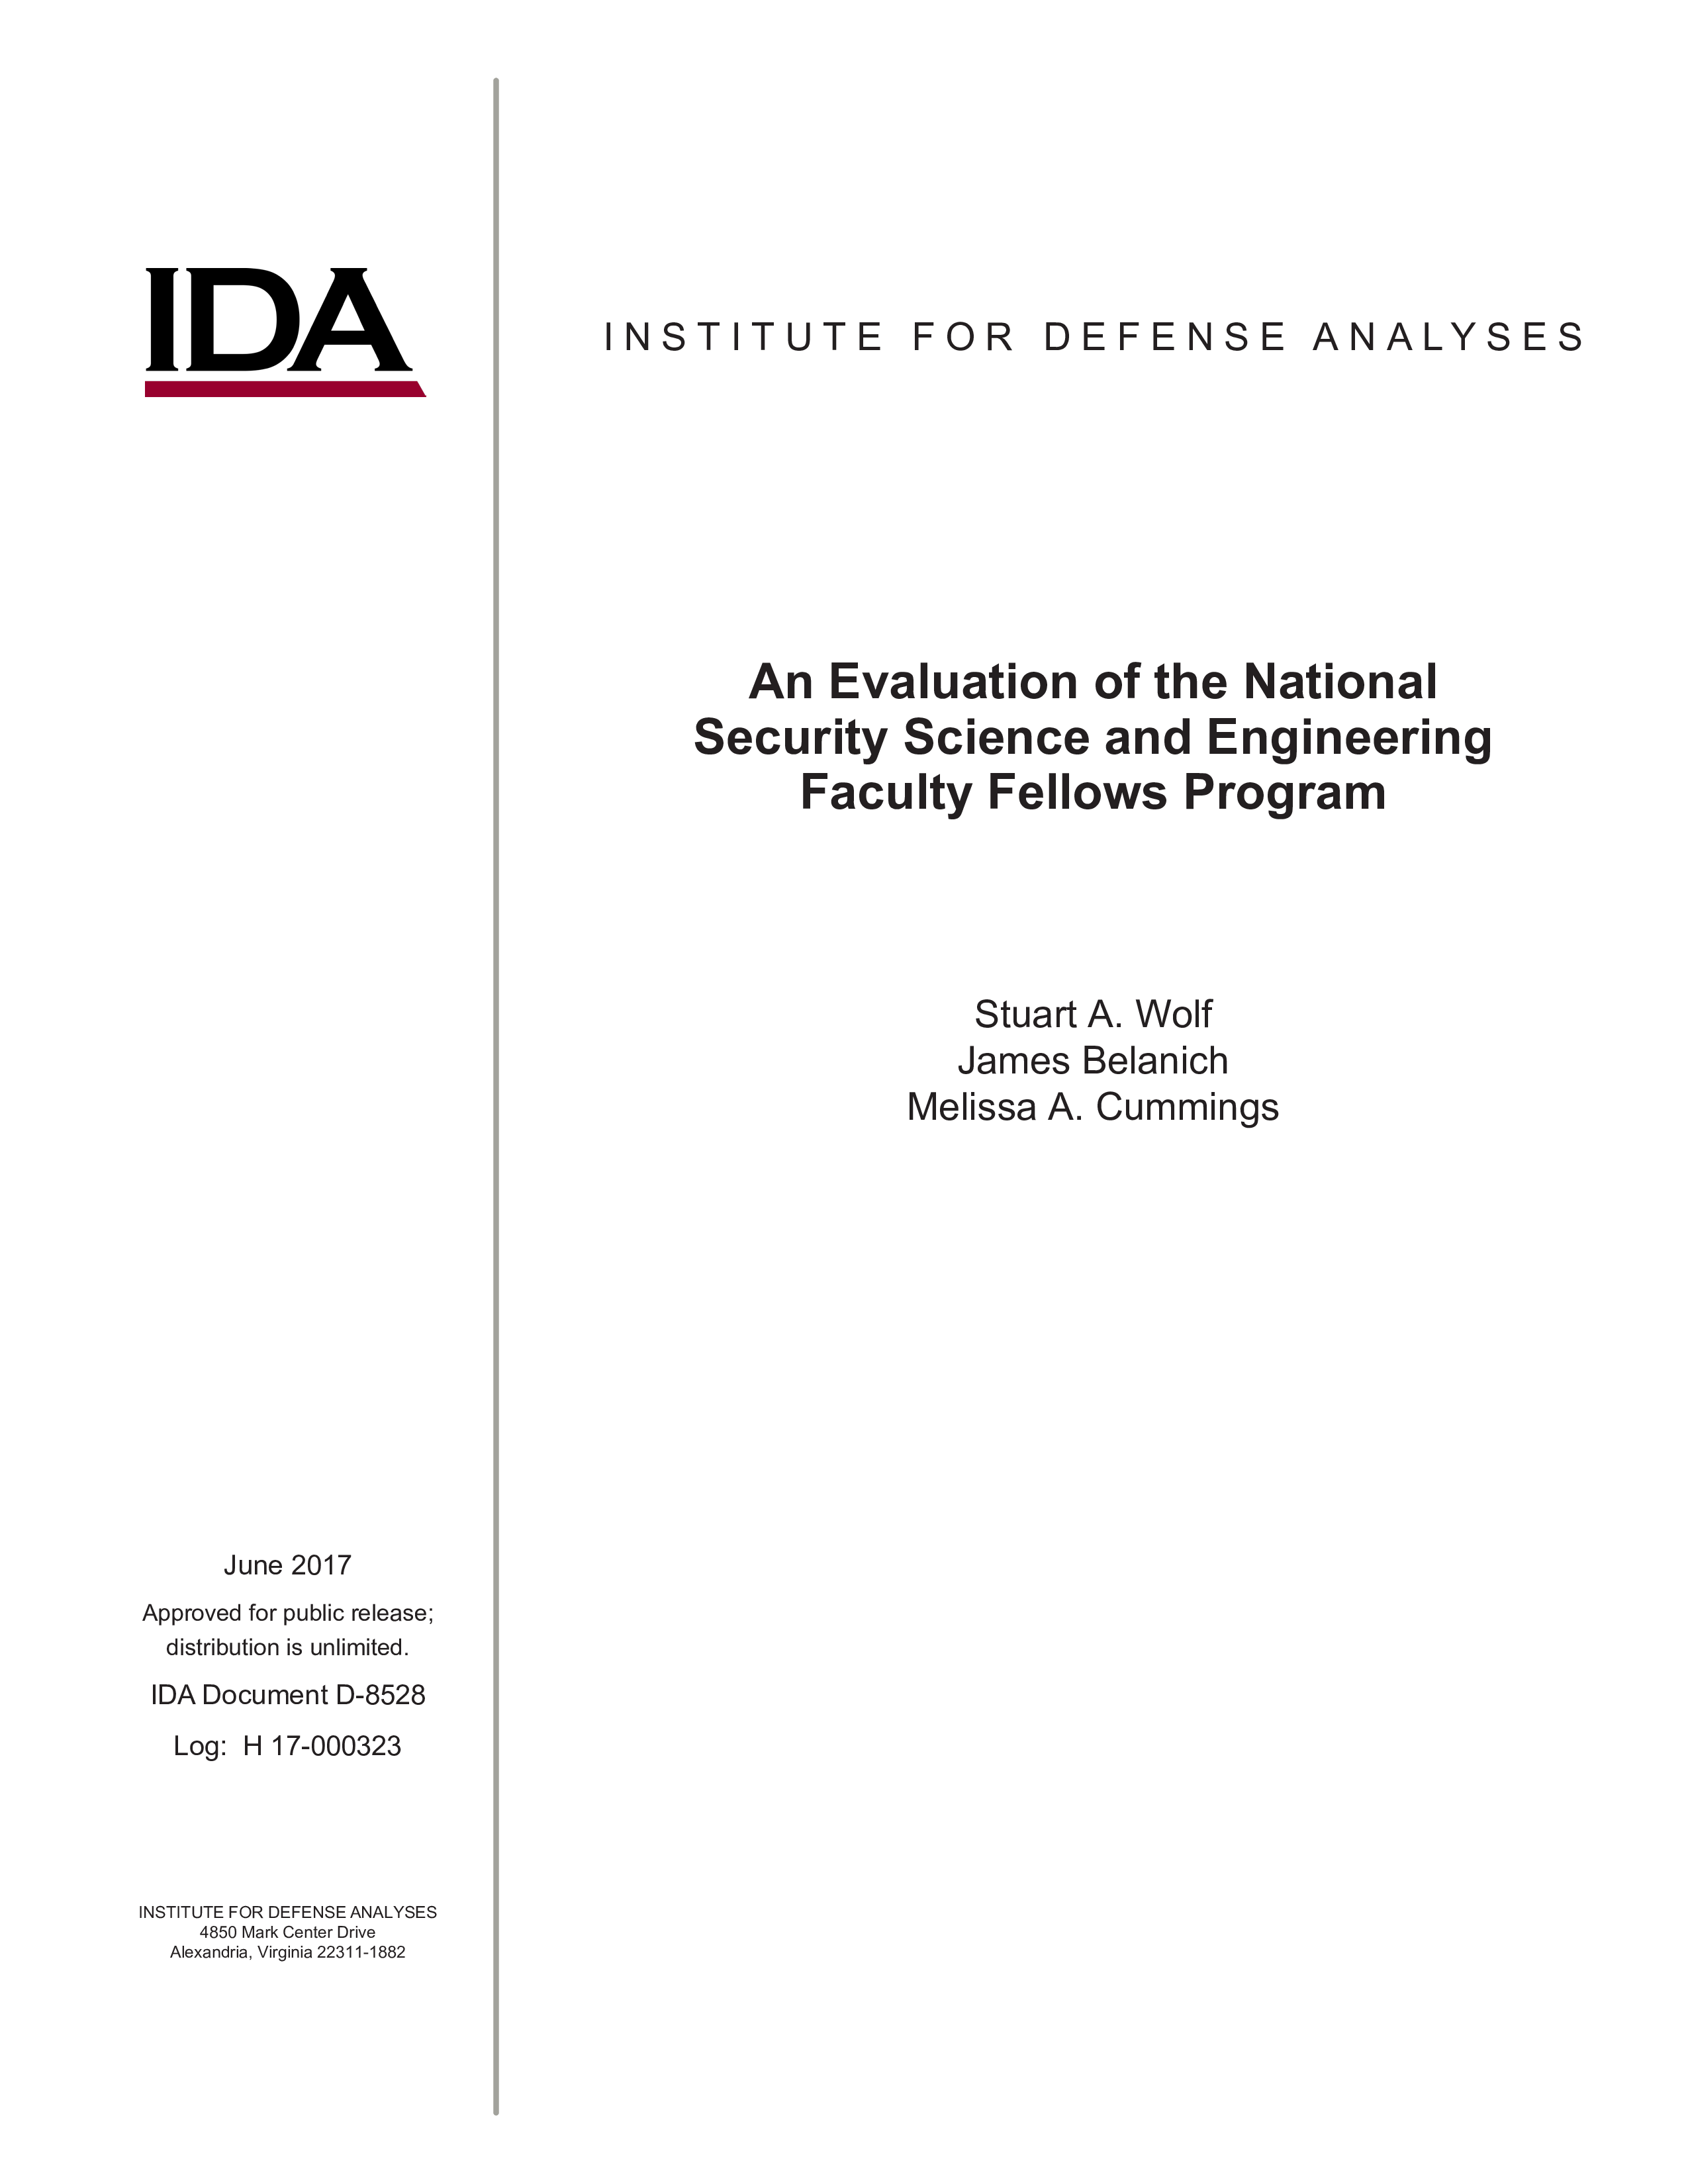 An Evaluation of the National Security Science and Engineering Faculty Fellows Program